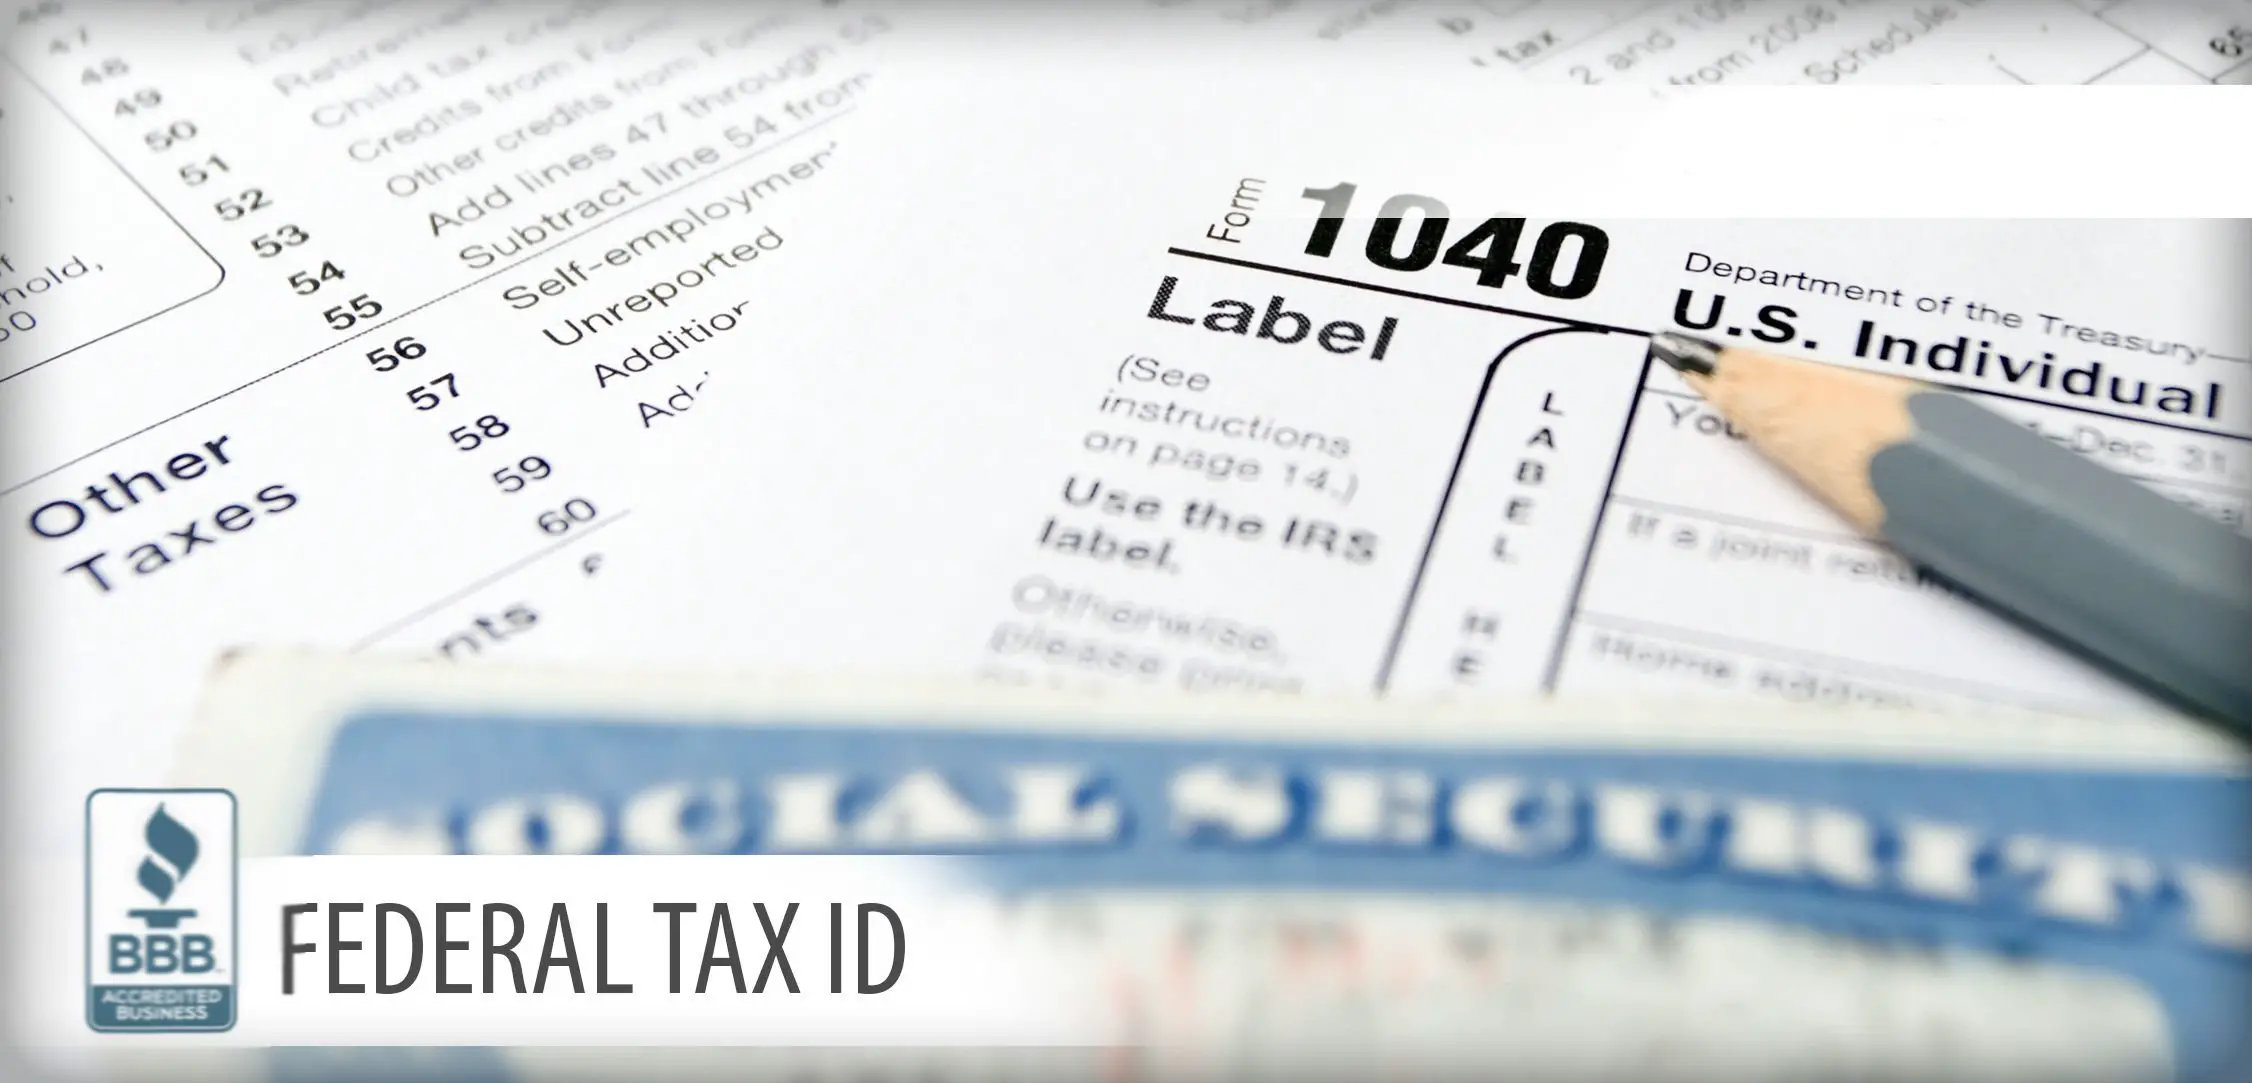 Federal Tax Identification Number: How to Get an EIN Online